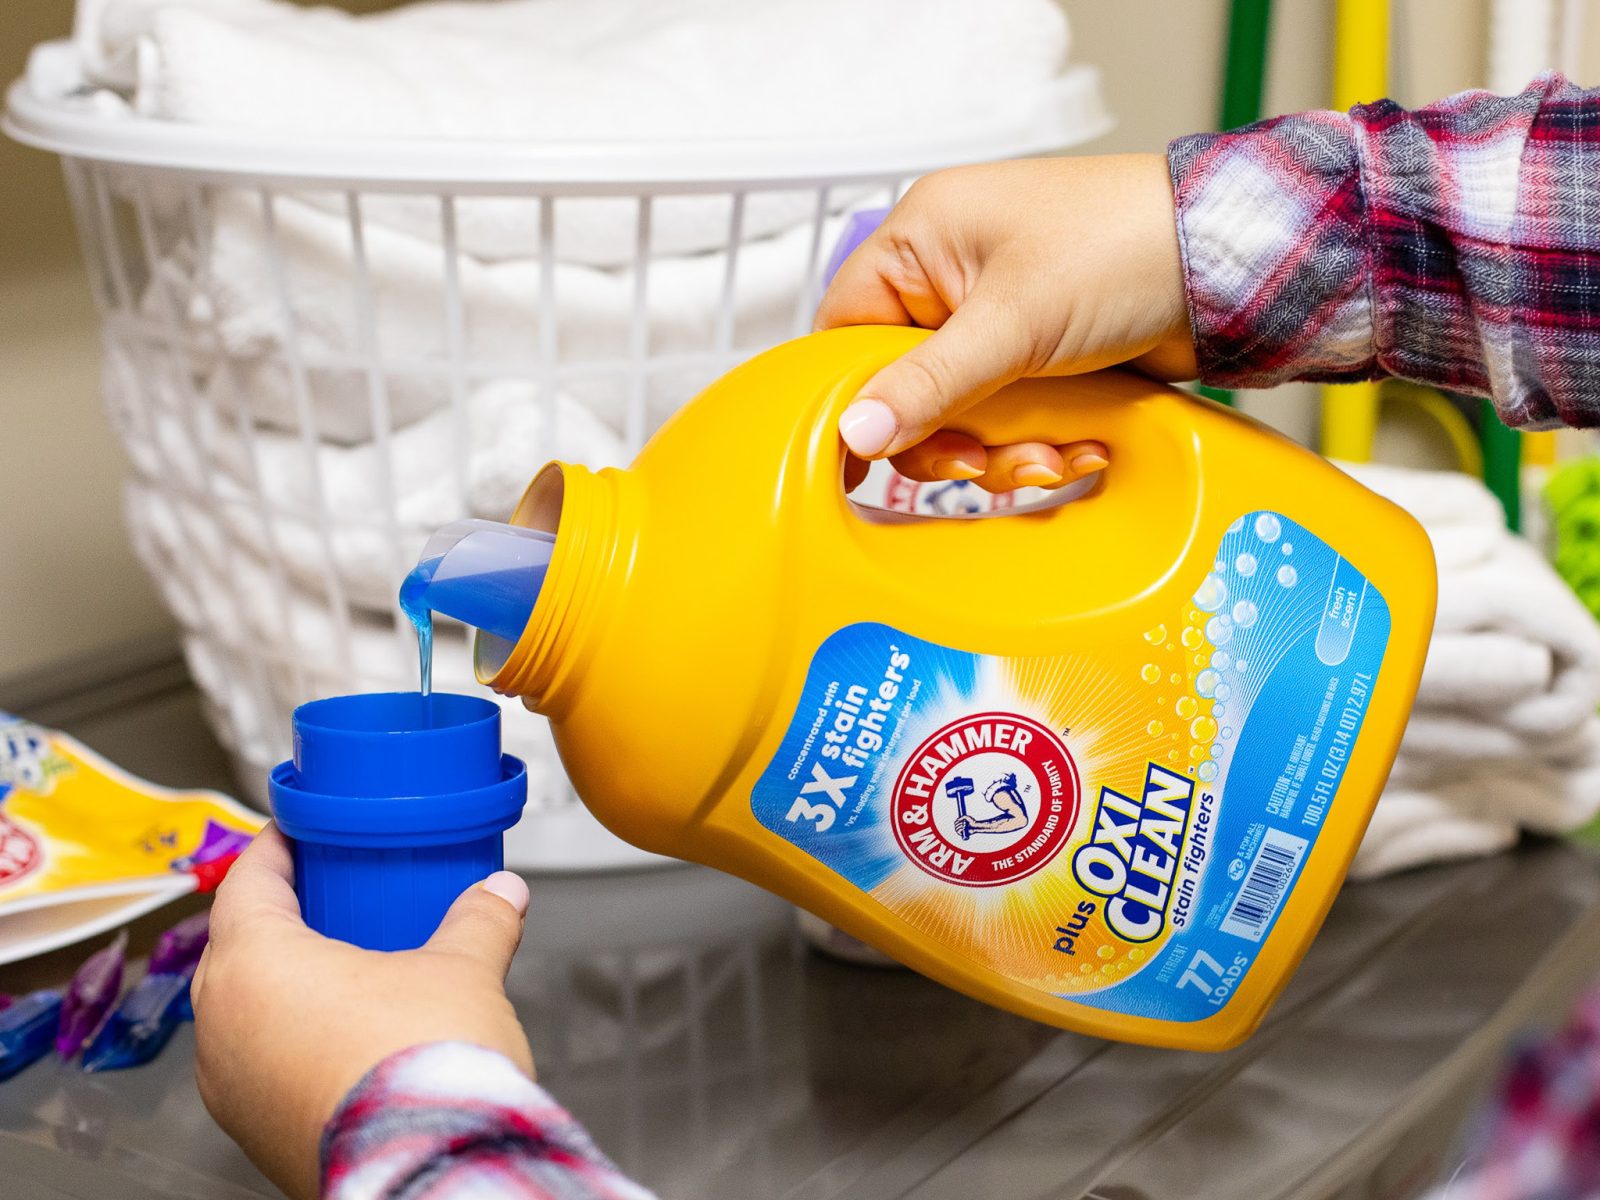 Don’t Miss Your Chance To Grab A Super Deal On ARM & HAMMER™ Plus OxiClean™ Liquid Laundry Detergent